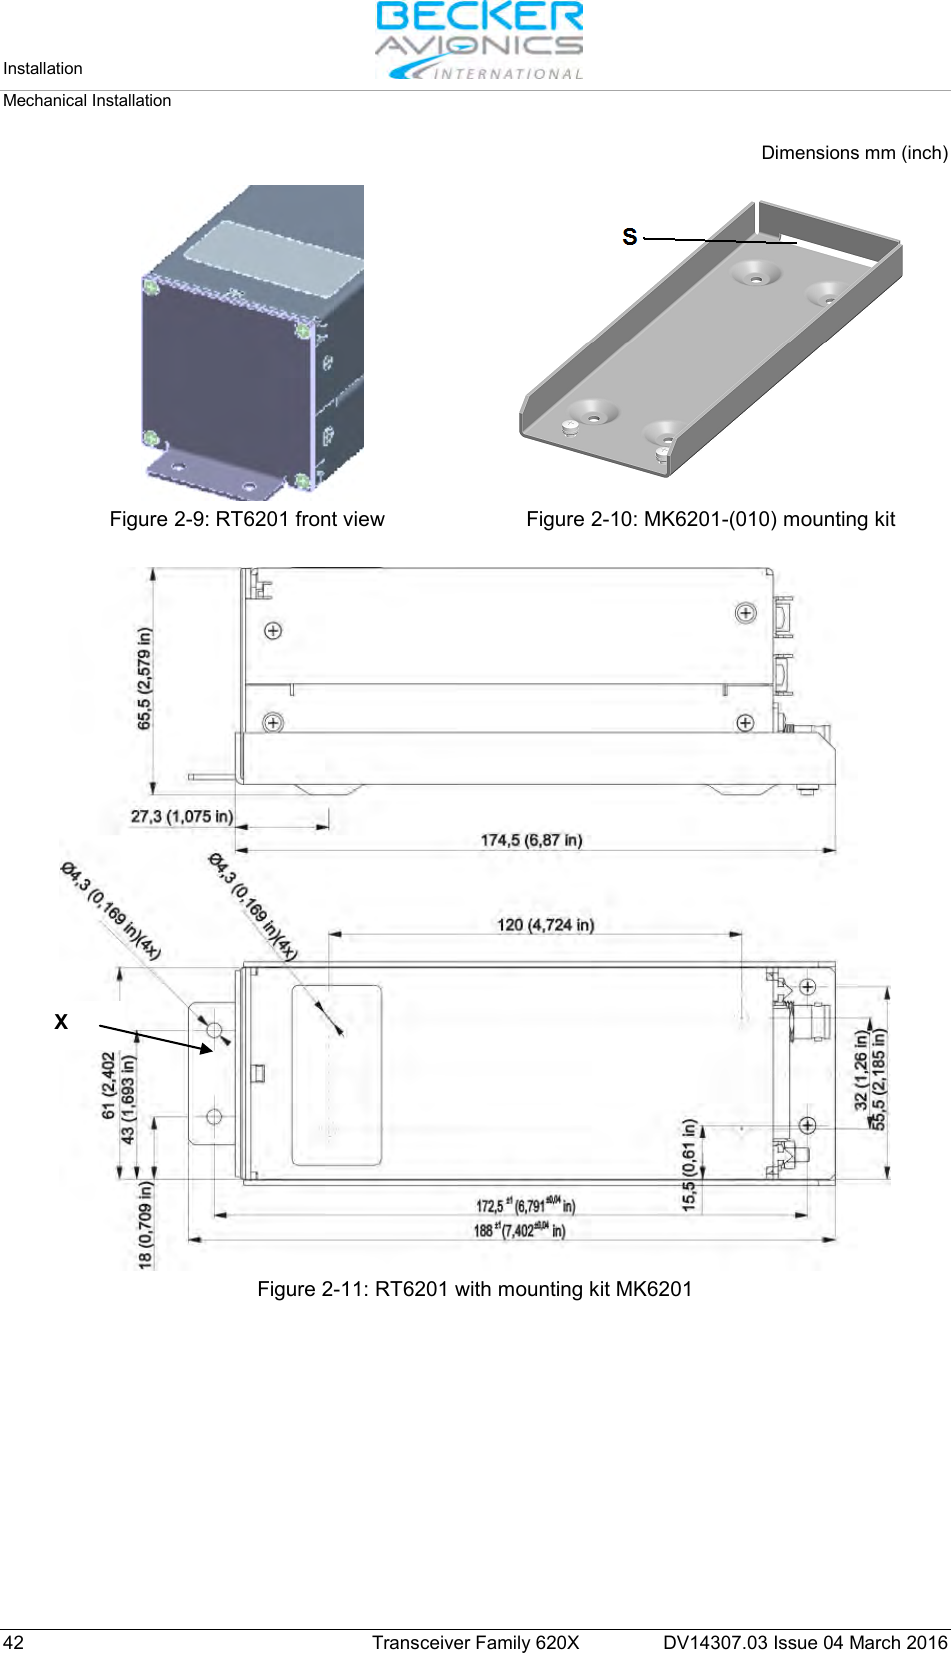 Installation   Mechanical Installation  42 Transceiver Family 620X DV14307.03 Issue 04 March 2016 Dimensions mm (inch)    Figure 2-9: RT6201 front view Figure 2-10: MK6201-(010) mounting kit   Figure 2-11: RT6201 with mounting kit MK6201  X 